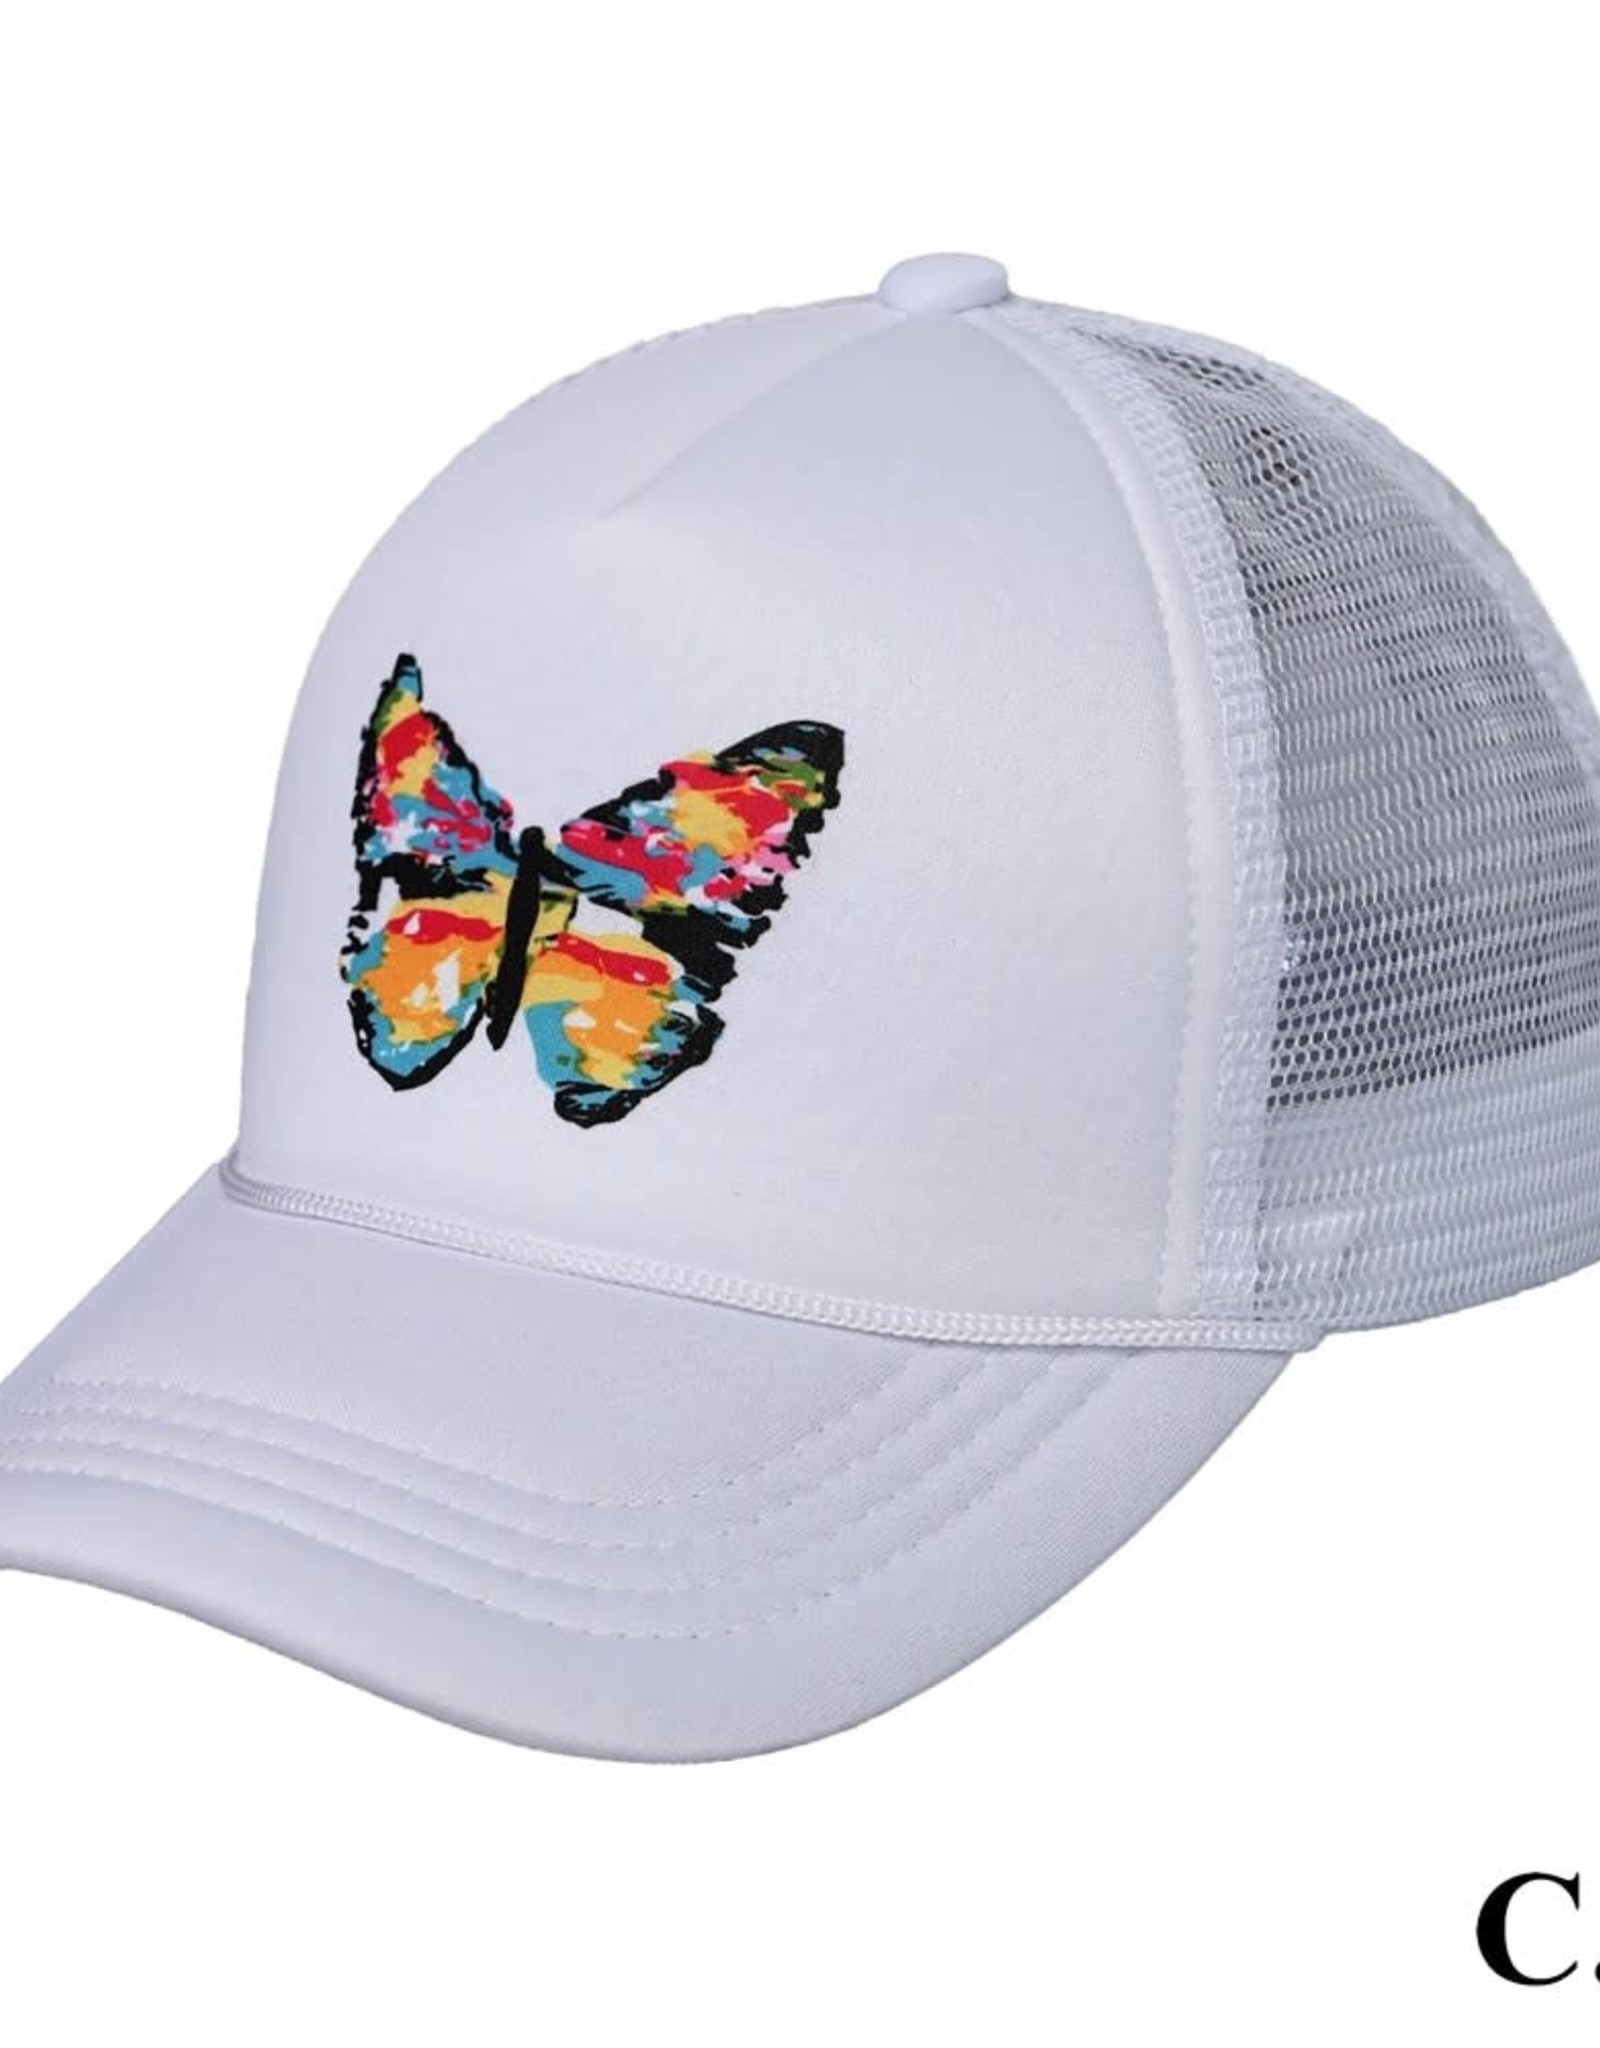 C.C Kids Hand Painted Abstract Butterfly Sublimation Trucker Baseball Cap